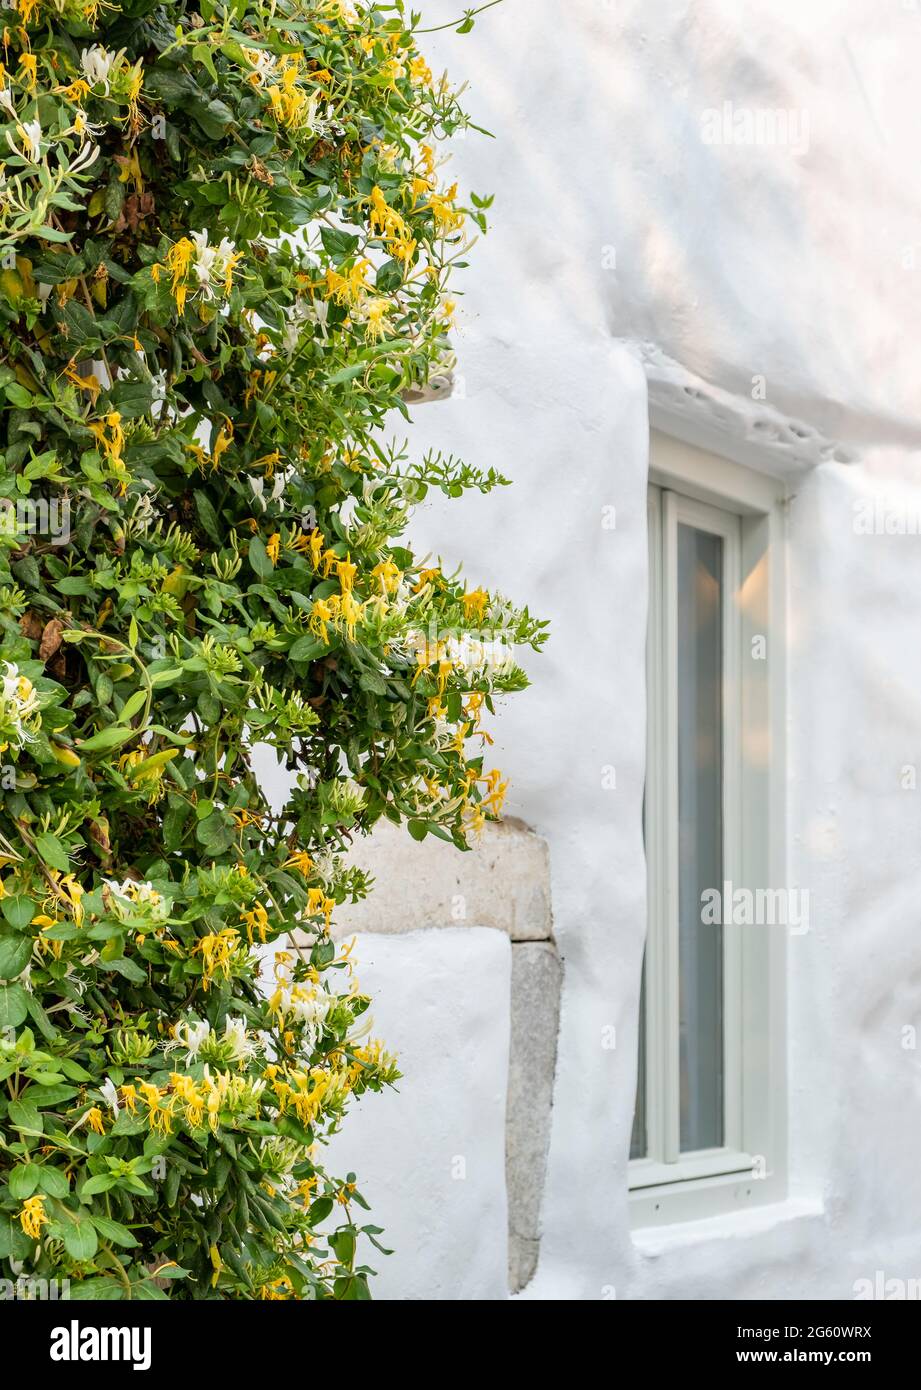 Blooming honeysuckle on whitewashed wall. Traditional building facade, white window on a fresh painted wall and climbing flowering plant decoration, c Stock Photo